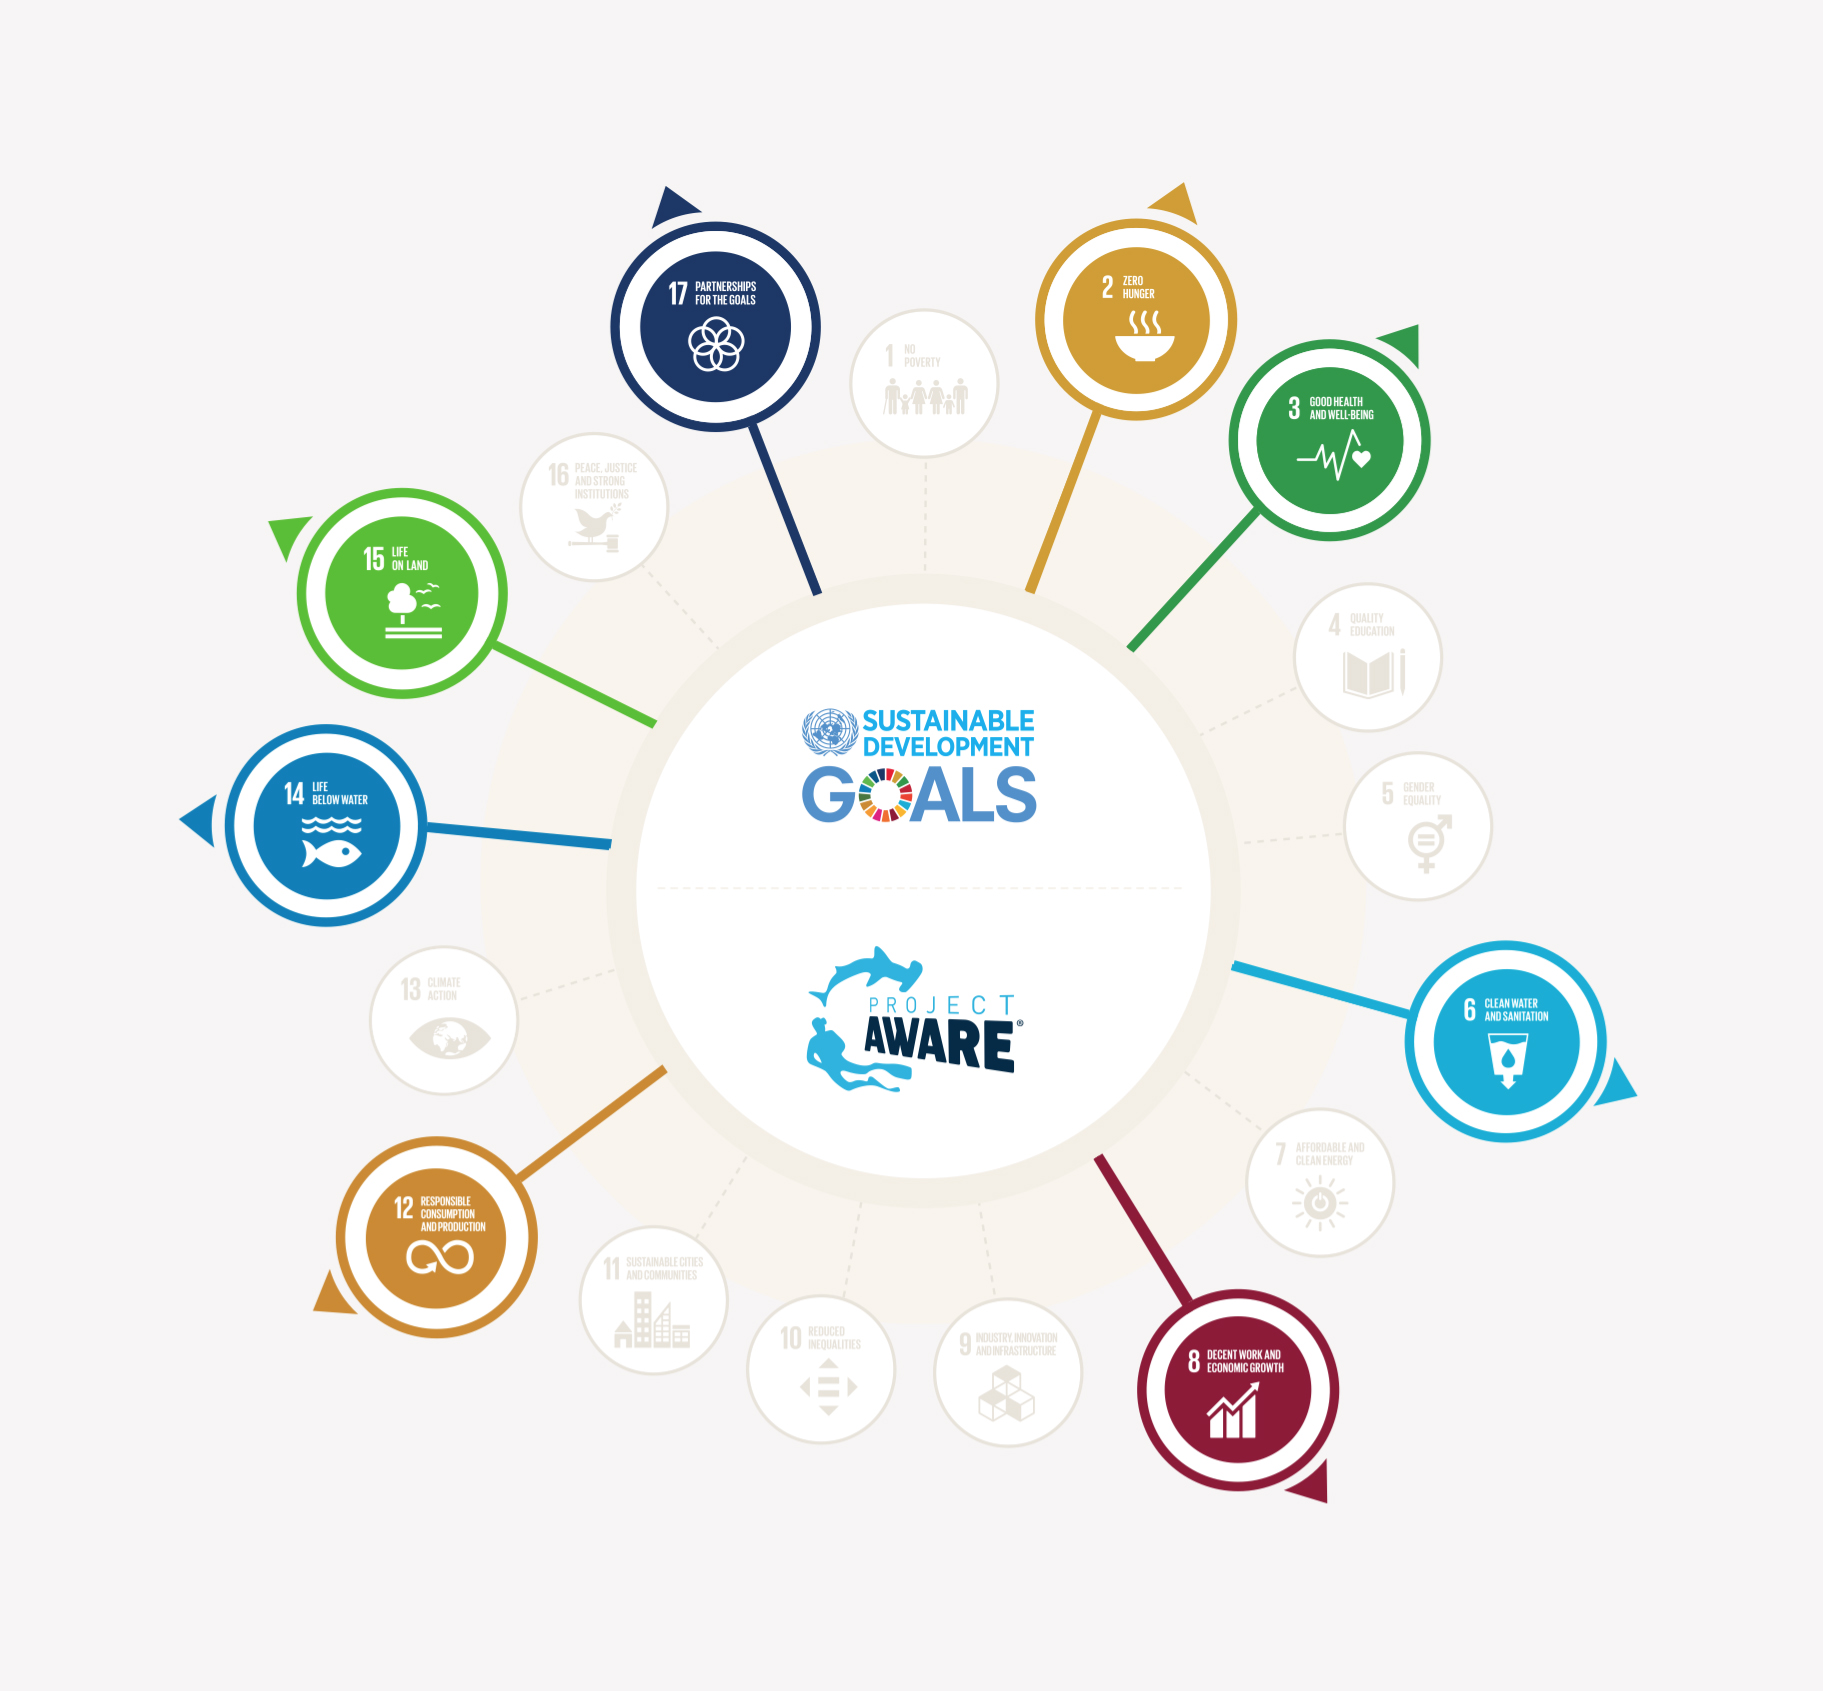 Project AWARE - SDG - Sustainable Development Goals - United Nations